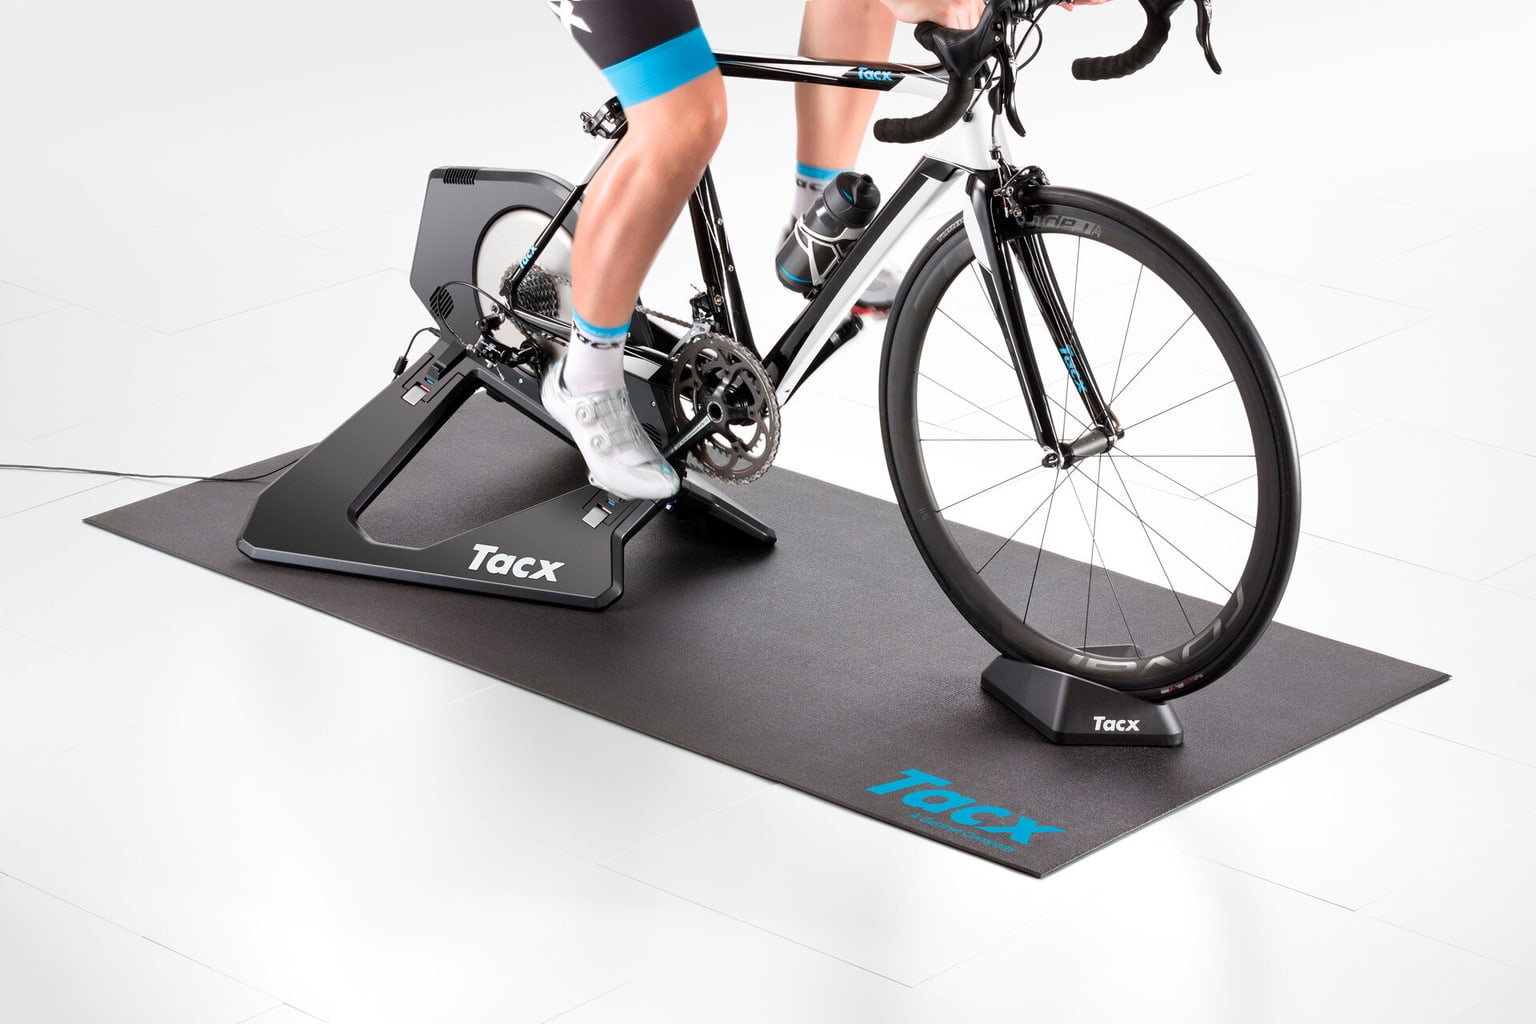 Tacx Tacx Trainermat Rollable Rollentrainer Zubehör 4